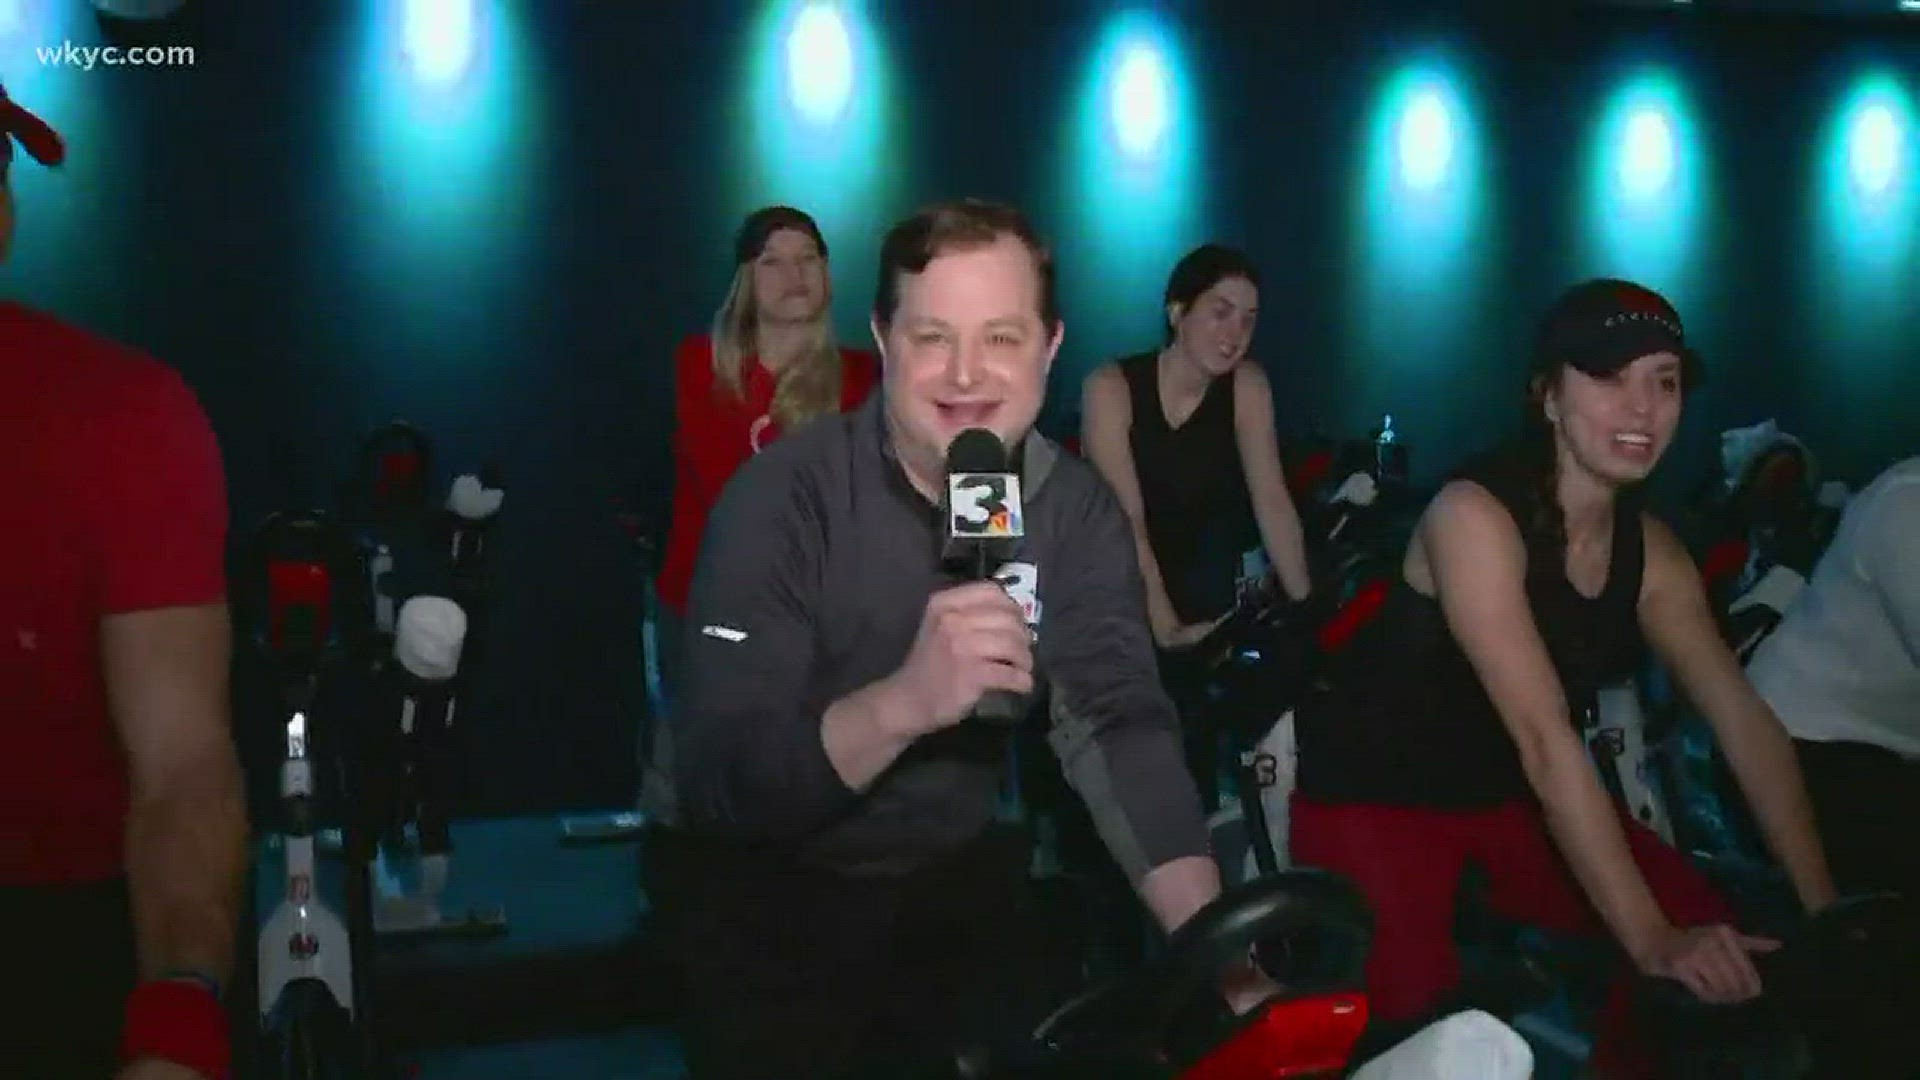 CycleBar Hudson: Eric gives it a try!